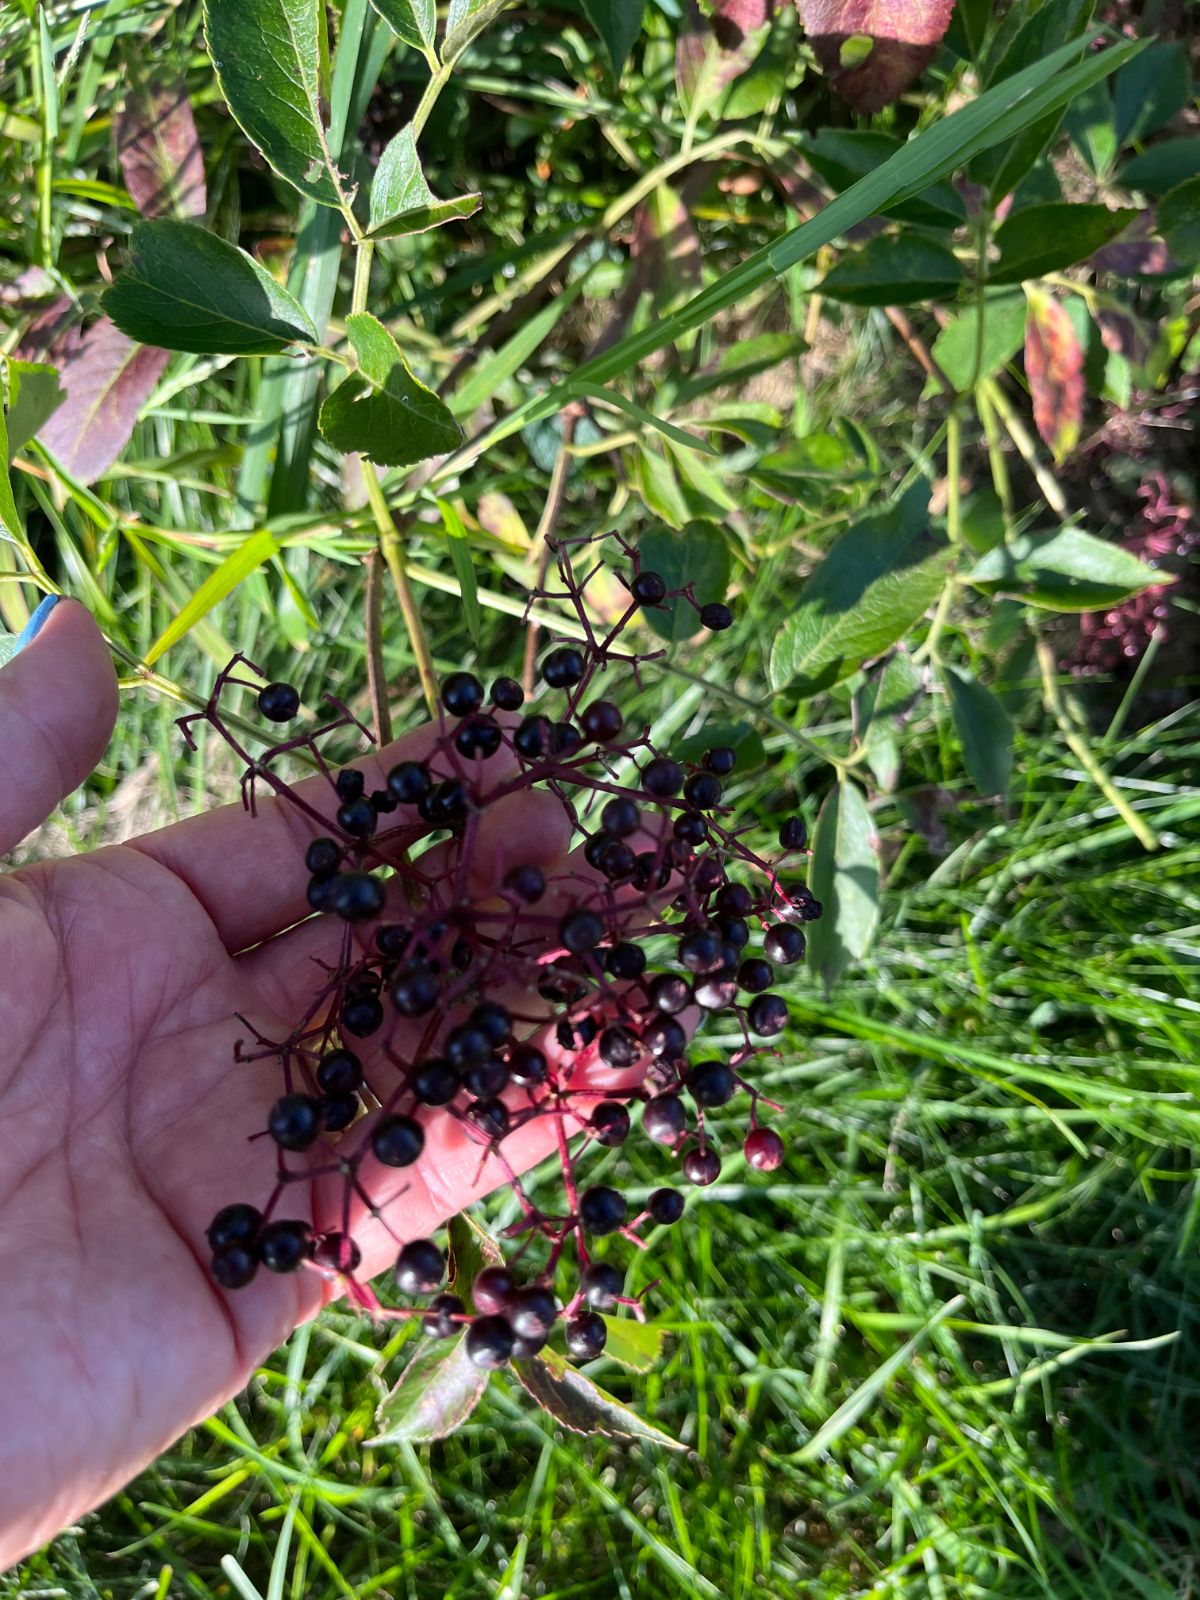 Elderberries on a bush ready to be picked